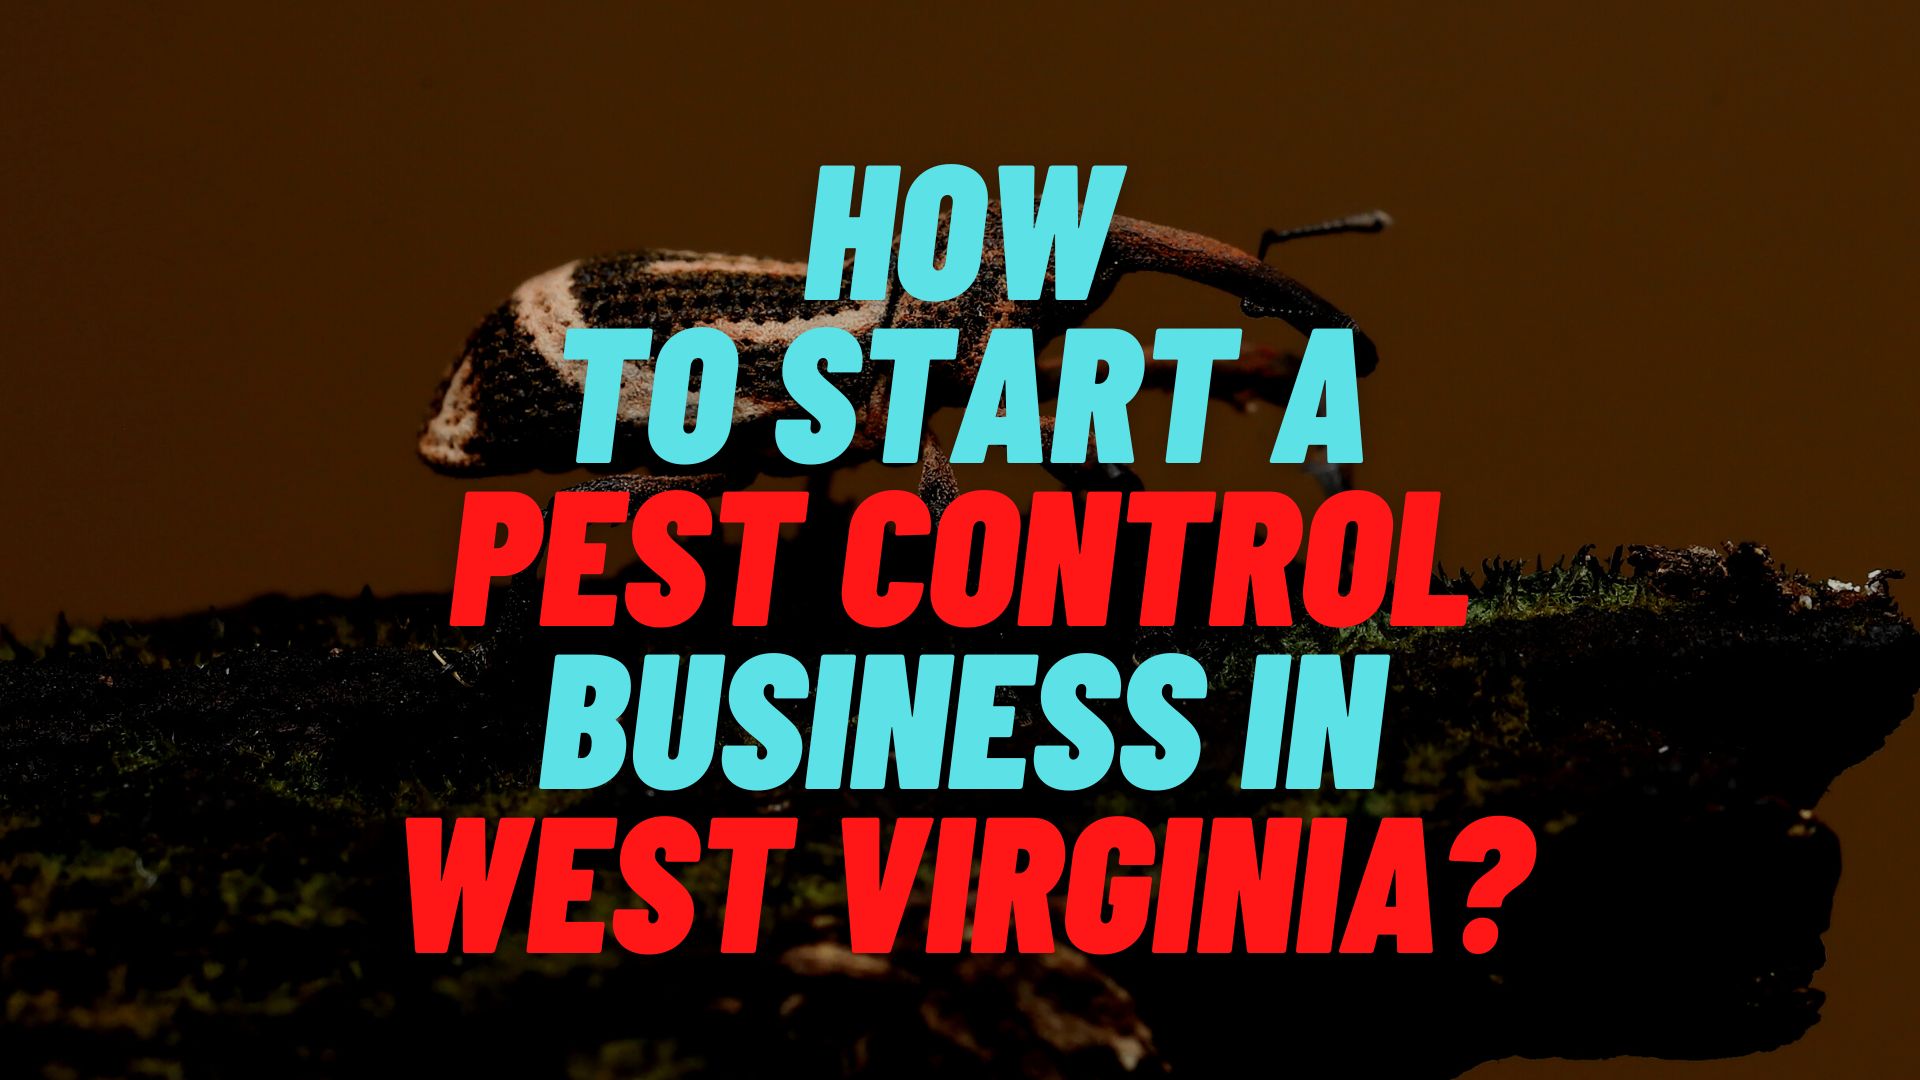 How to start a pest control business in West Virginia?